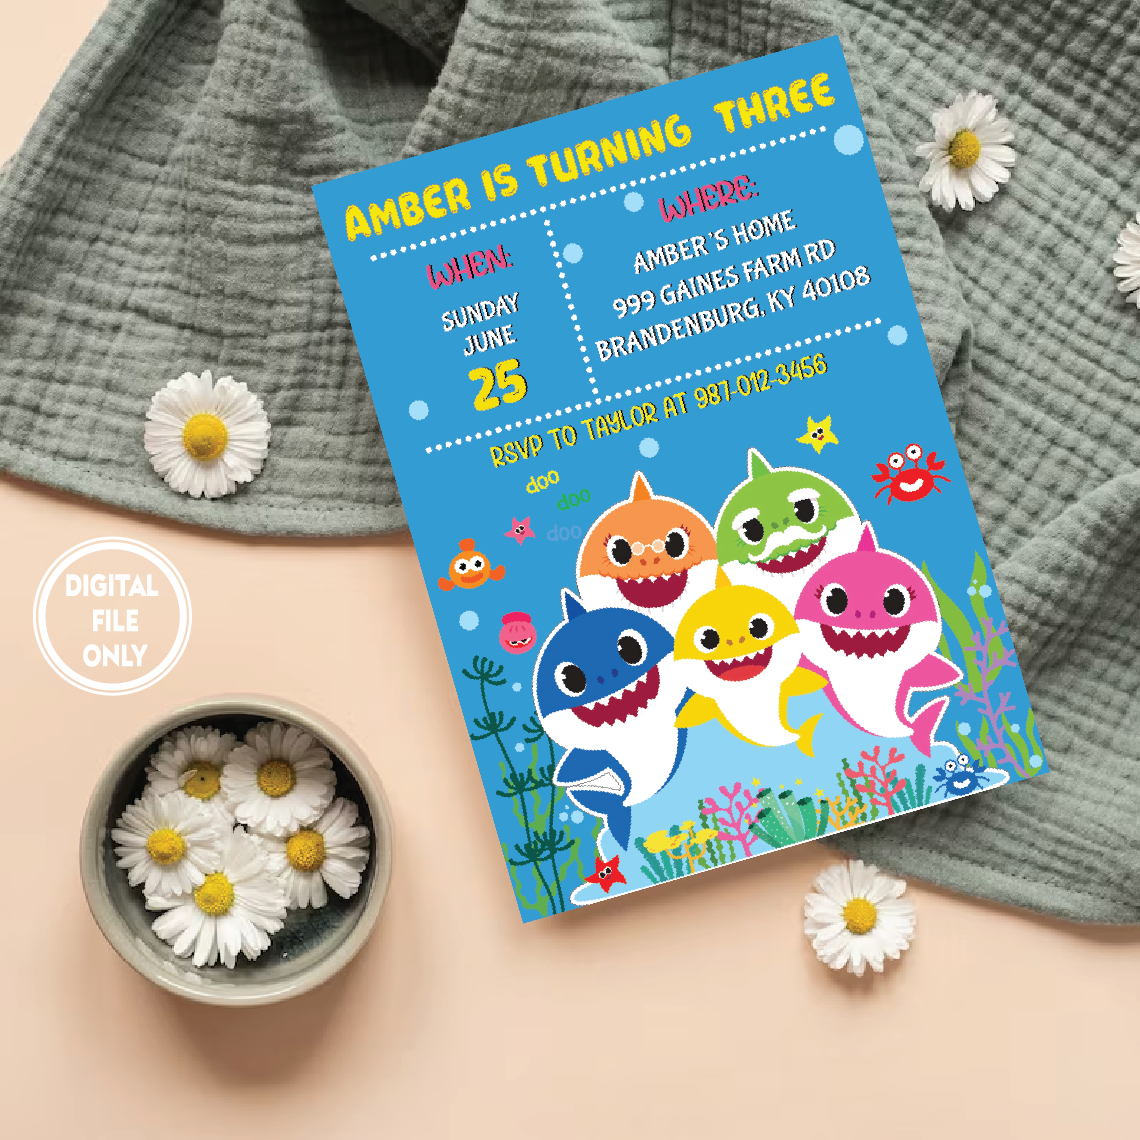 Personalized File Baby Shark Invitation, Baby Birthday Invitation,shark party,Baby Shark Birthday Invitation ,Kid Party Digital Invite PNG File Only